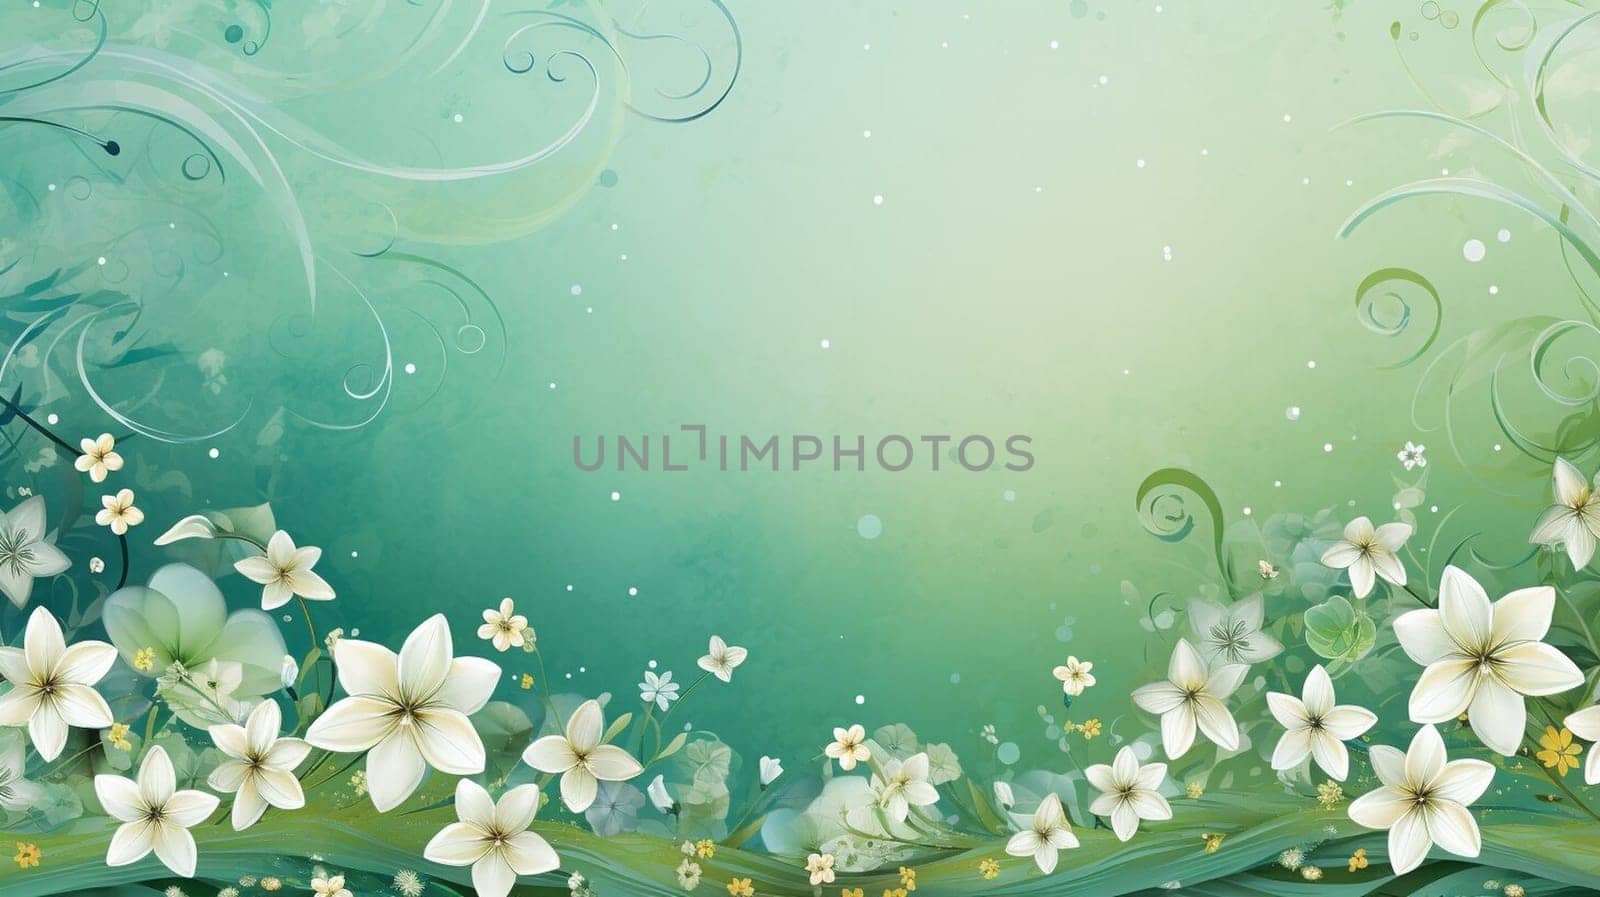 Spring and summer decorations background with beautiful wild flowers. Copy space for text banner. by sergeykoshkin